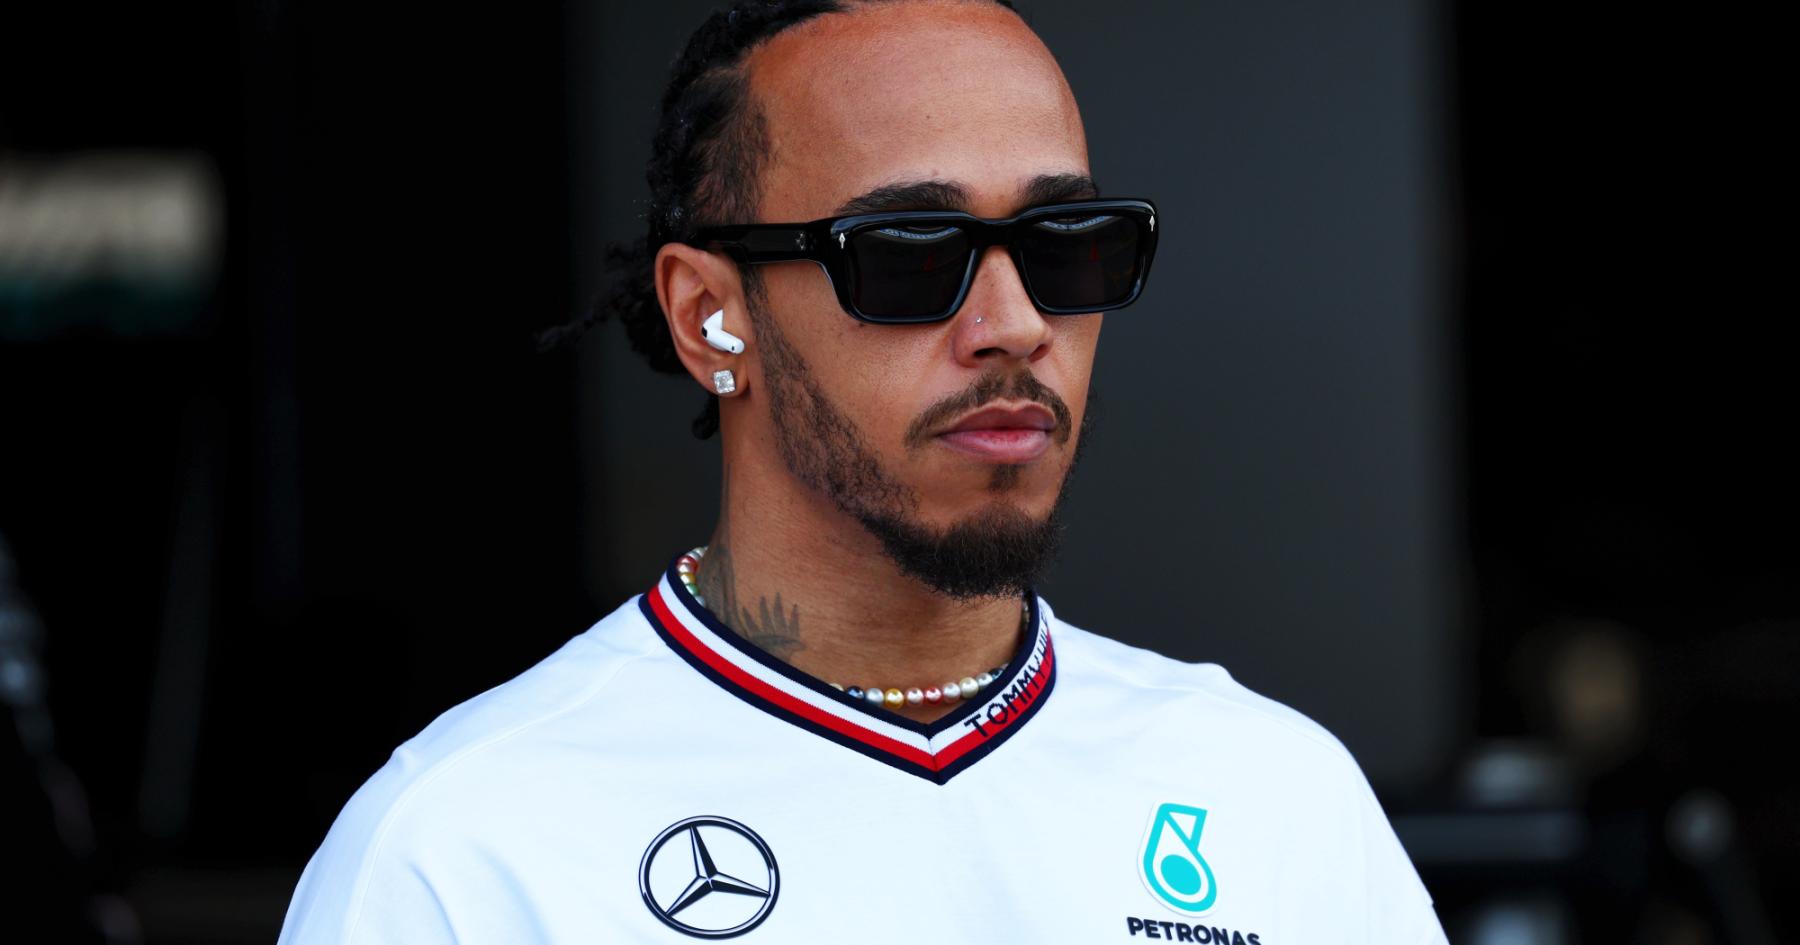 Unprecedented Setback: Hamilton Reveals the Reason Behind his Worst Qualifying Performance in Seven Years